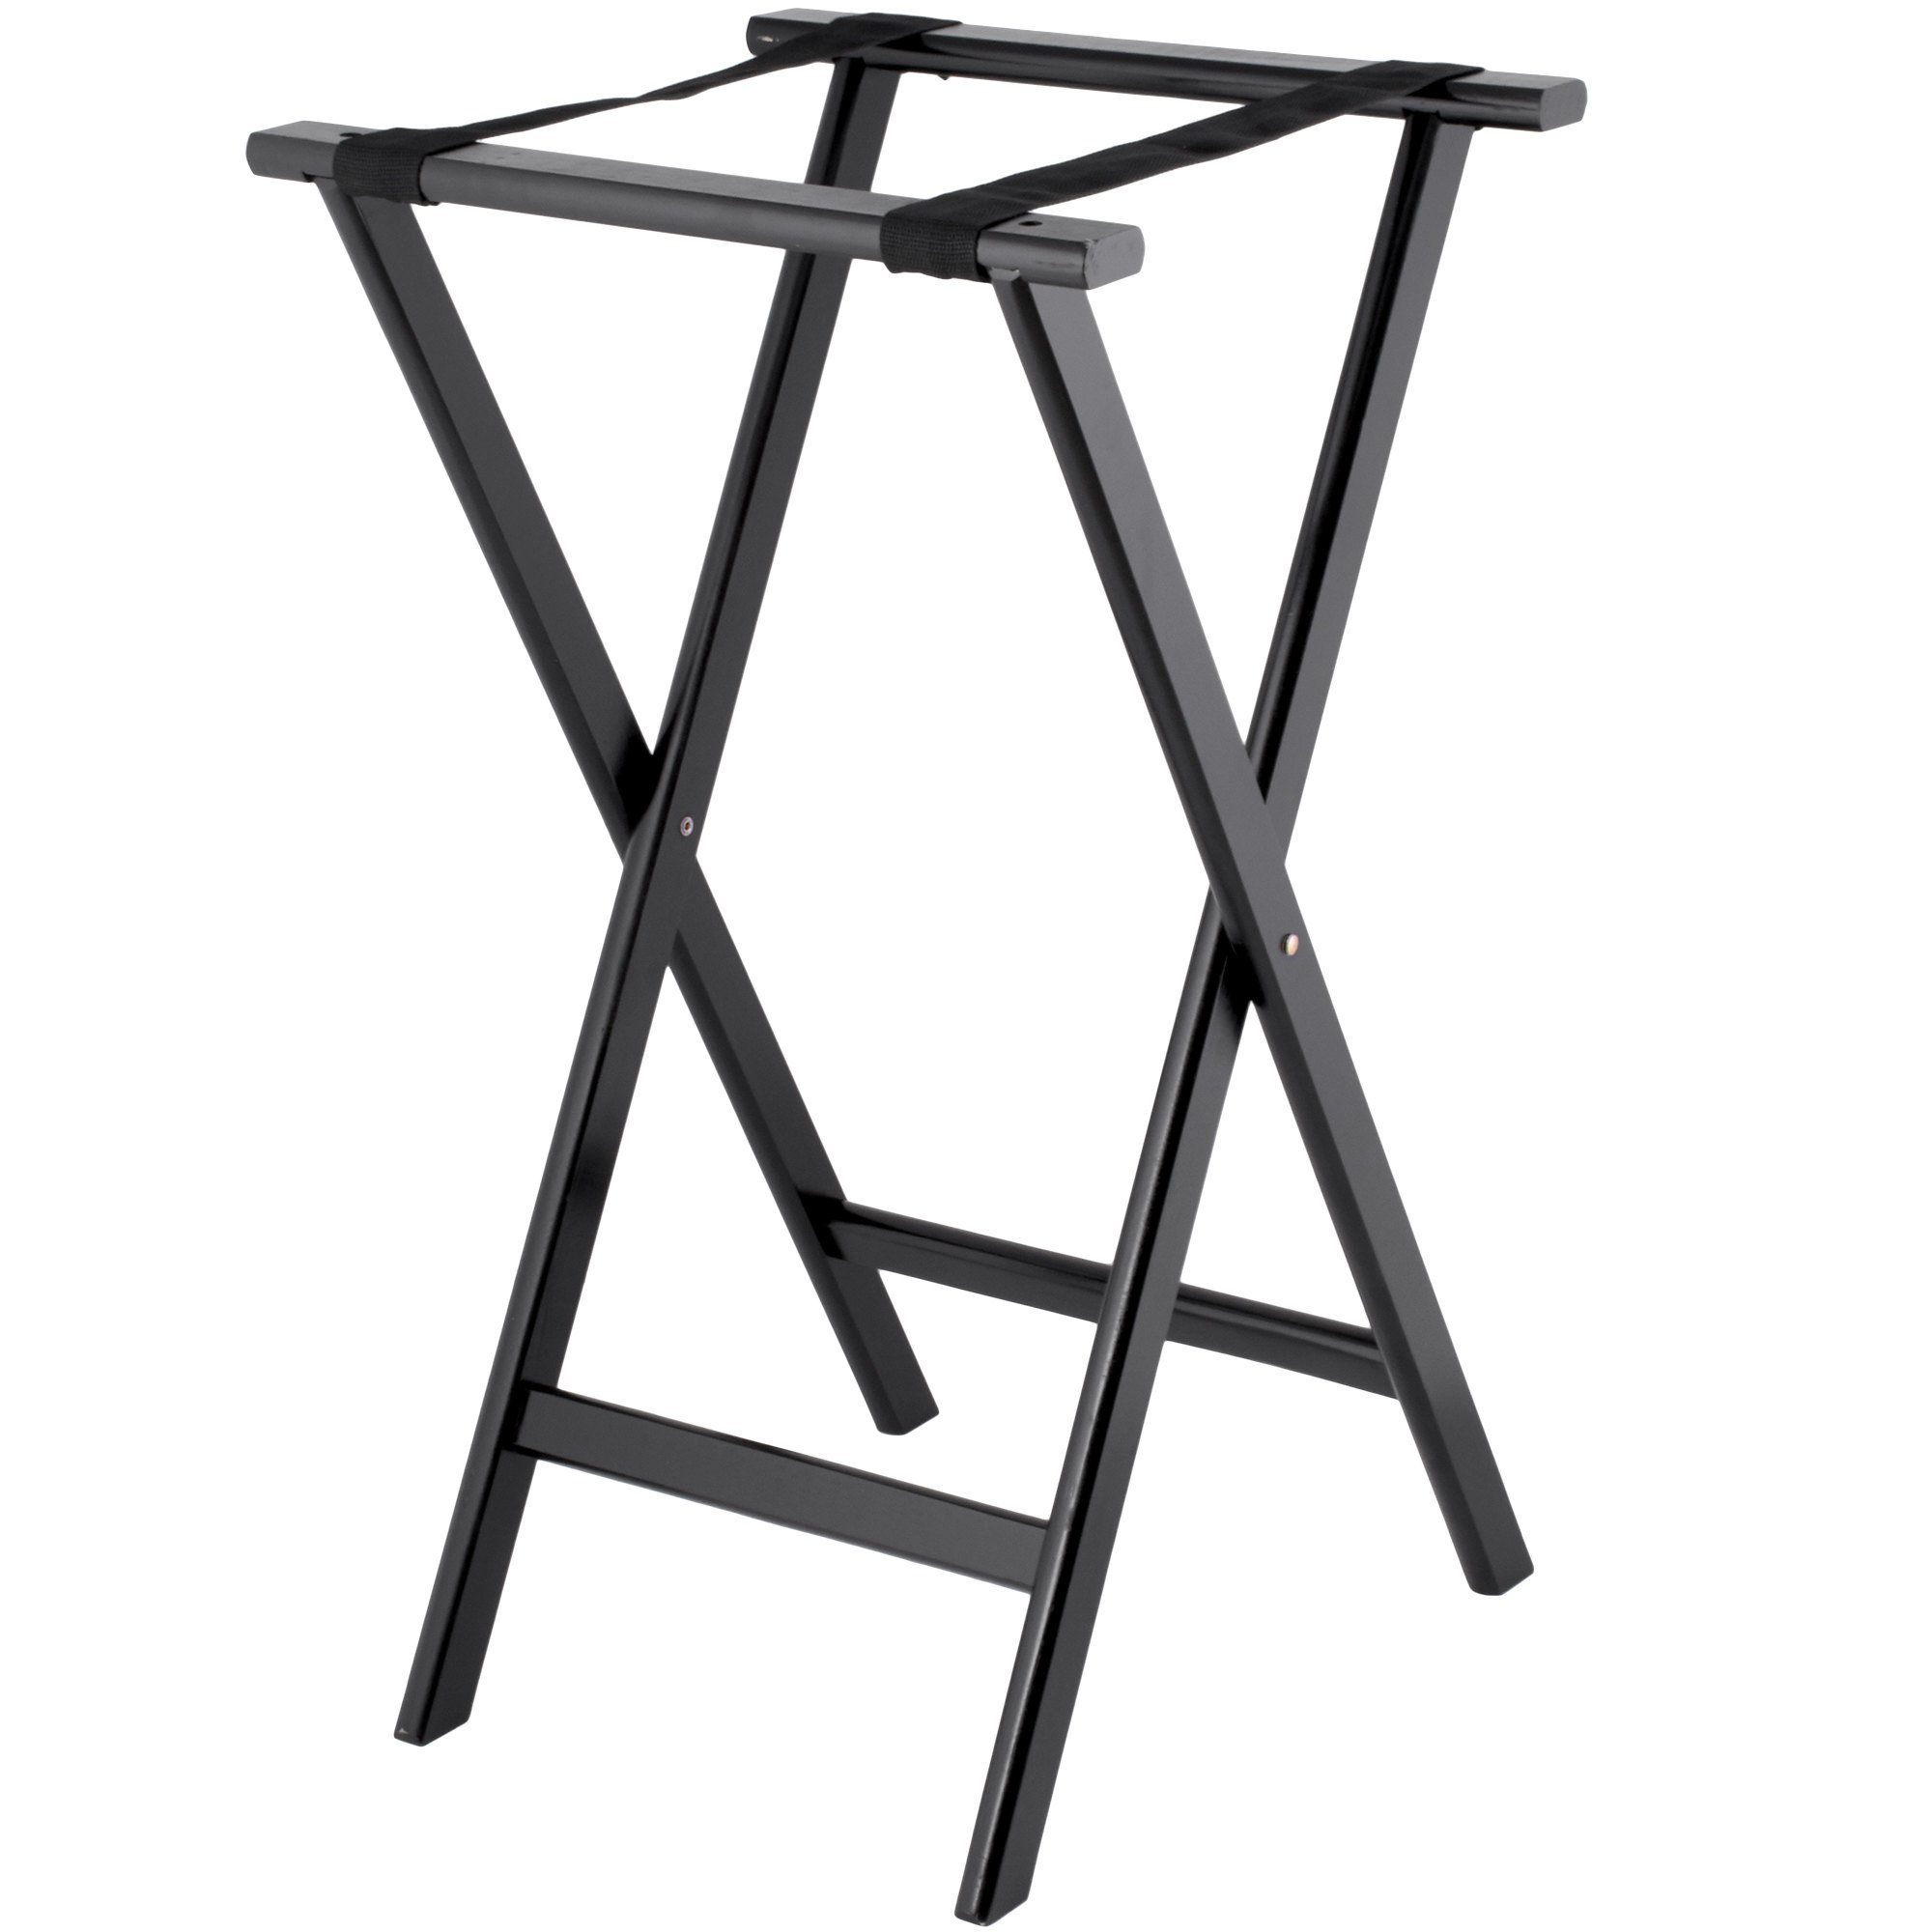 Restaurant Folding Wood Tray Stand Featured Image